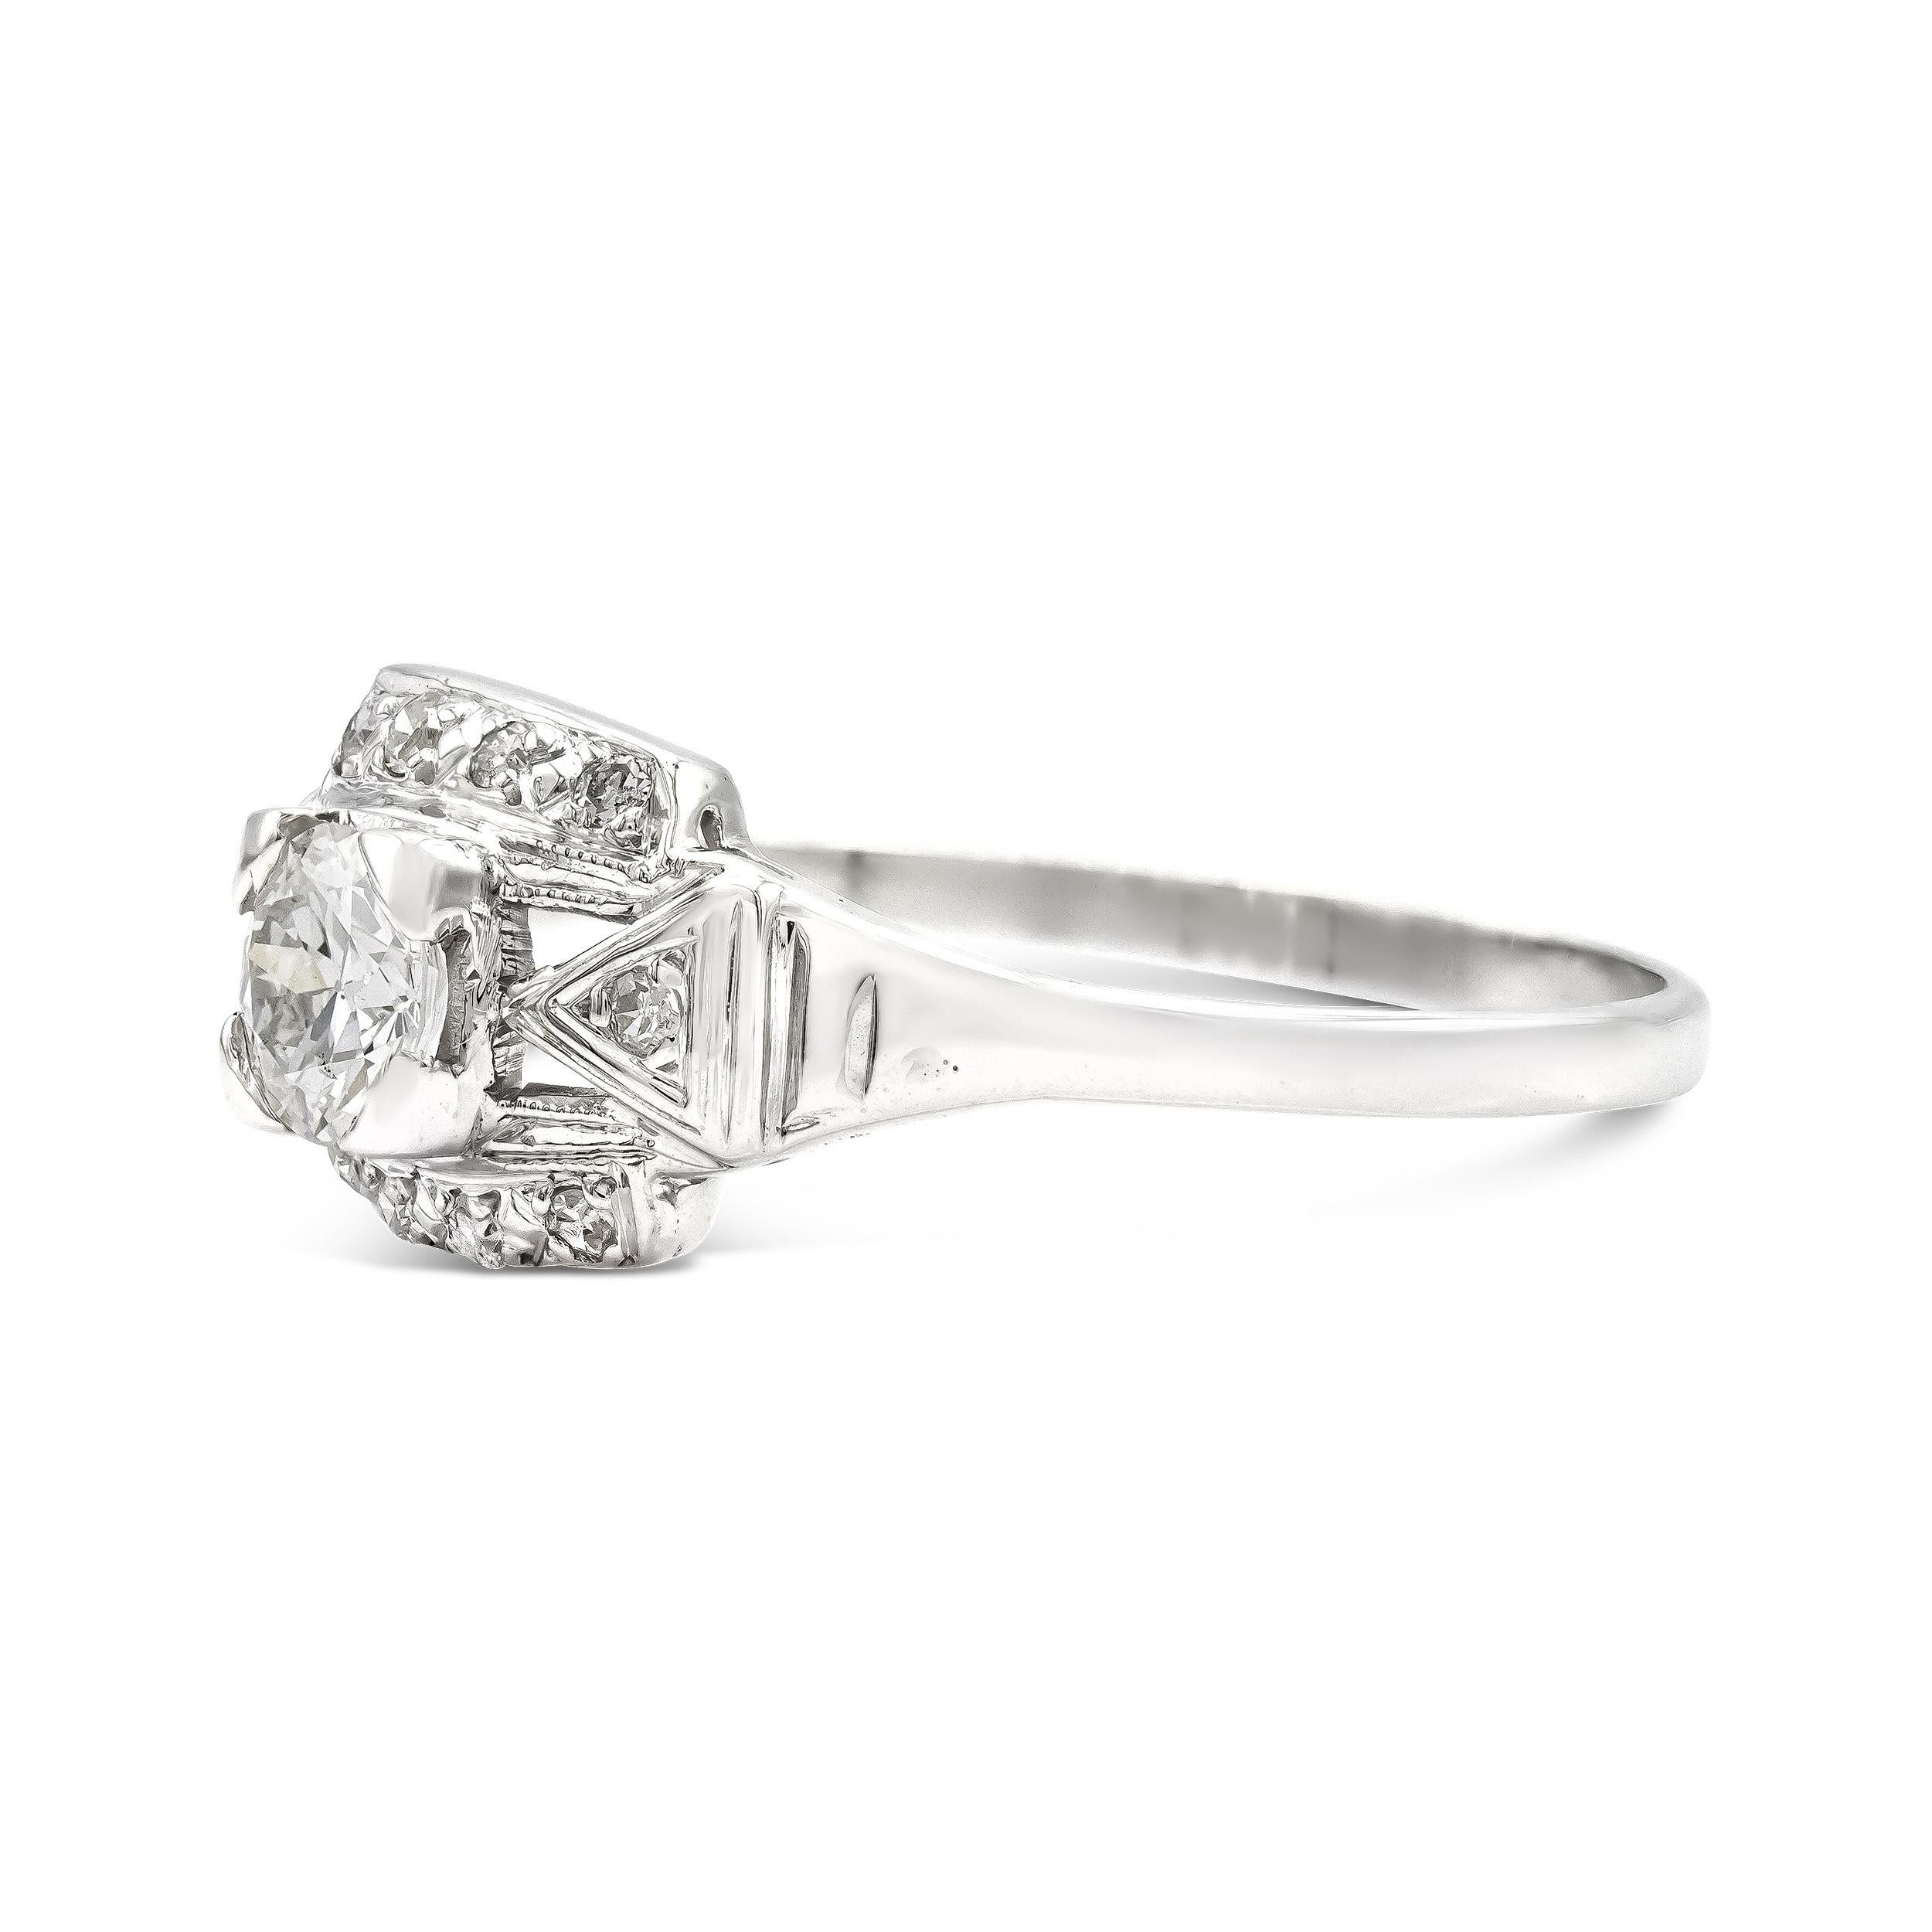 A deco-era engagement ring featuring a super attractive GIA graded old European cut diamond. The square prongs, typical of the deco era, give the 0.58 carat center the illusion of being larger. We especially love the indicative frame setting. This